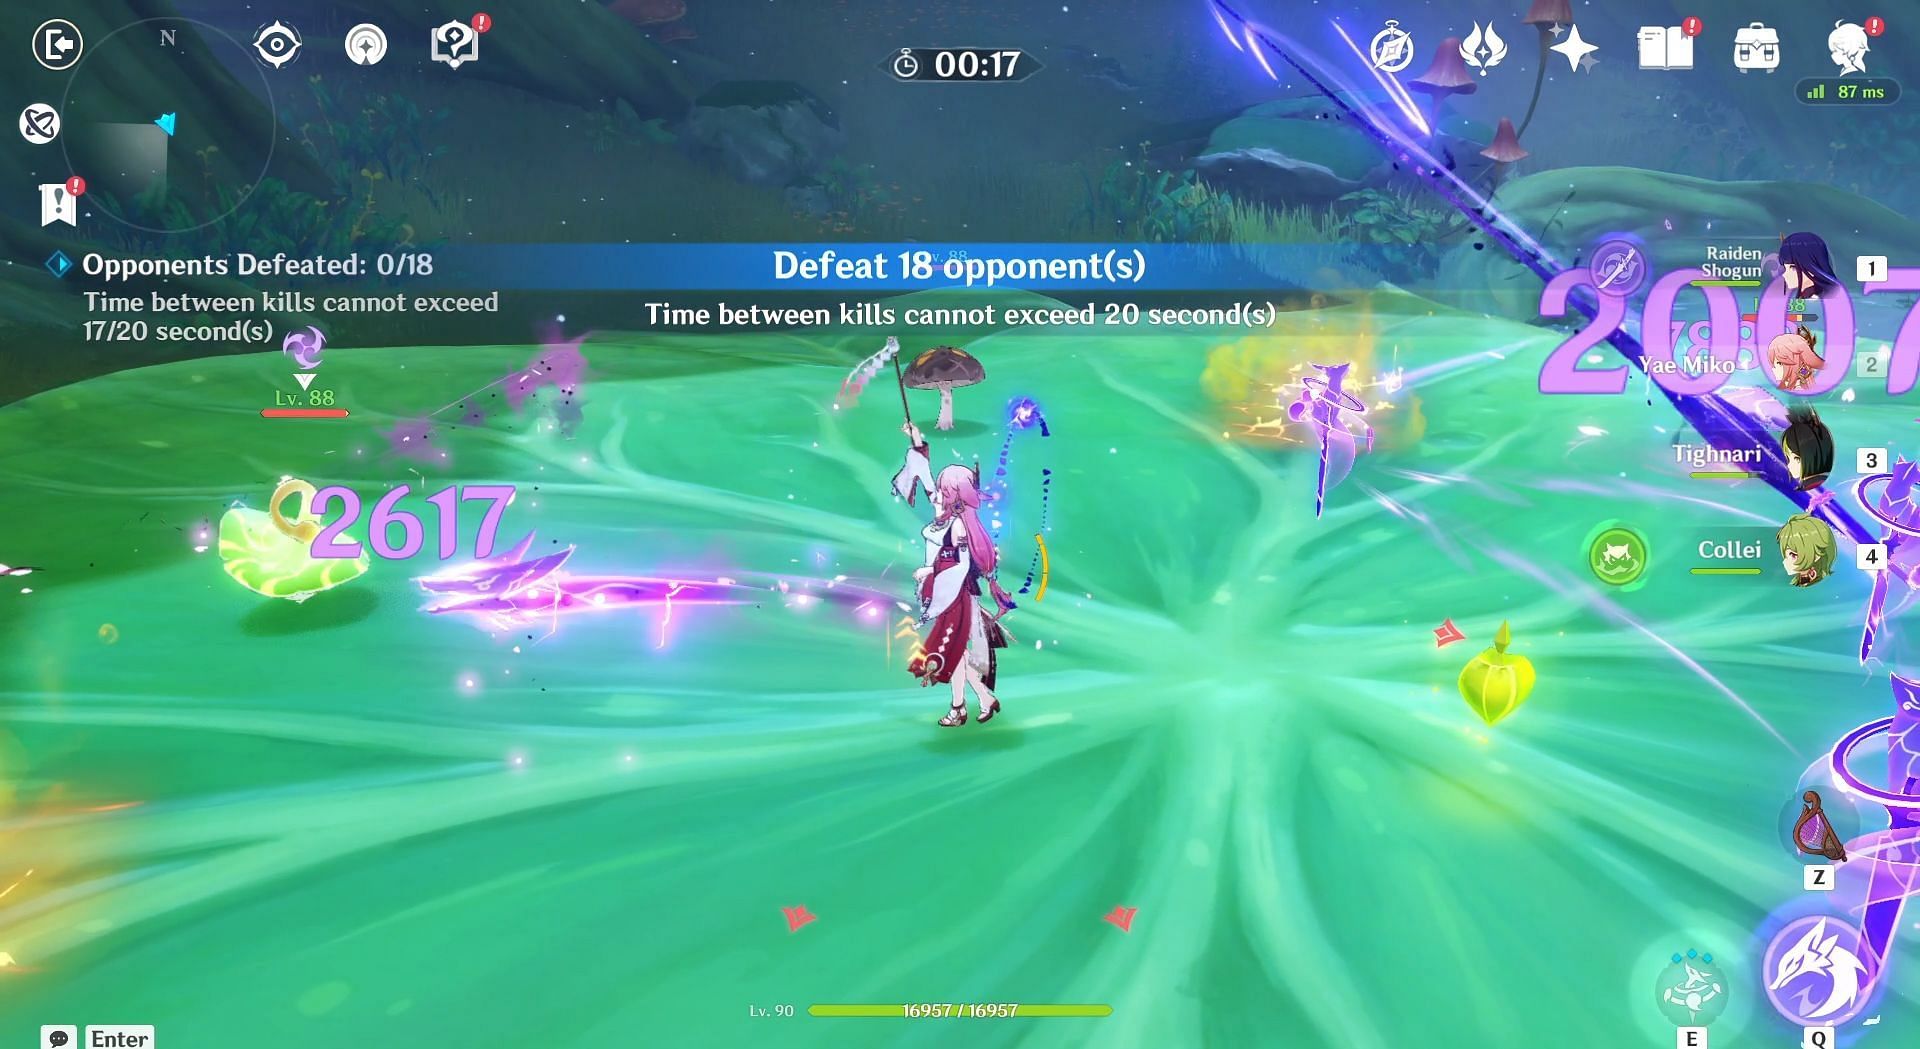 Defeat opponents within the time limit (Image via HoYoverse)